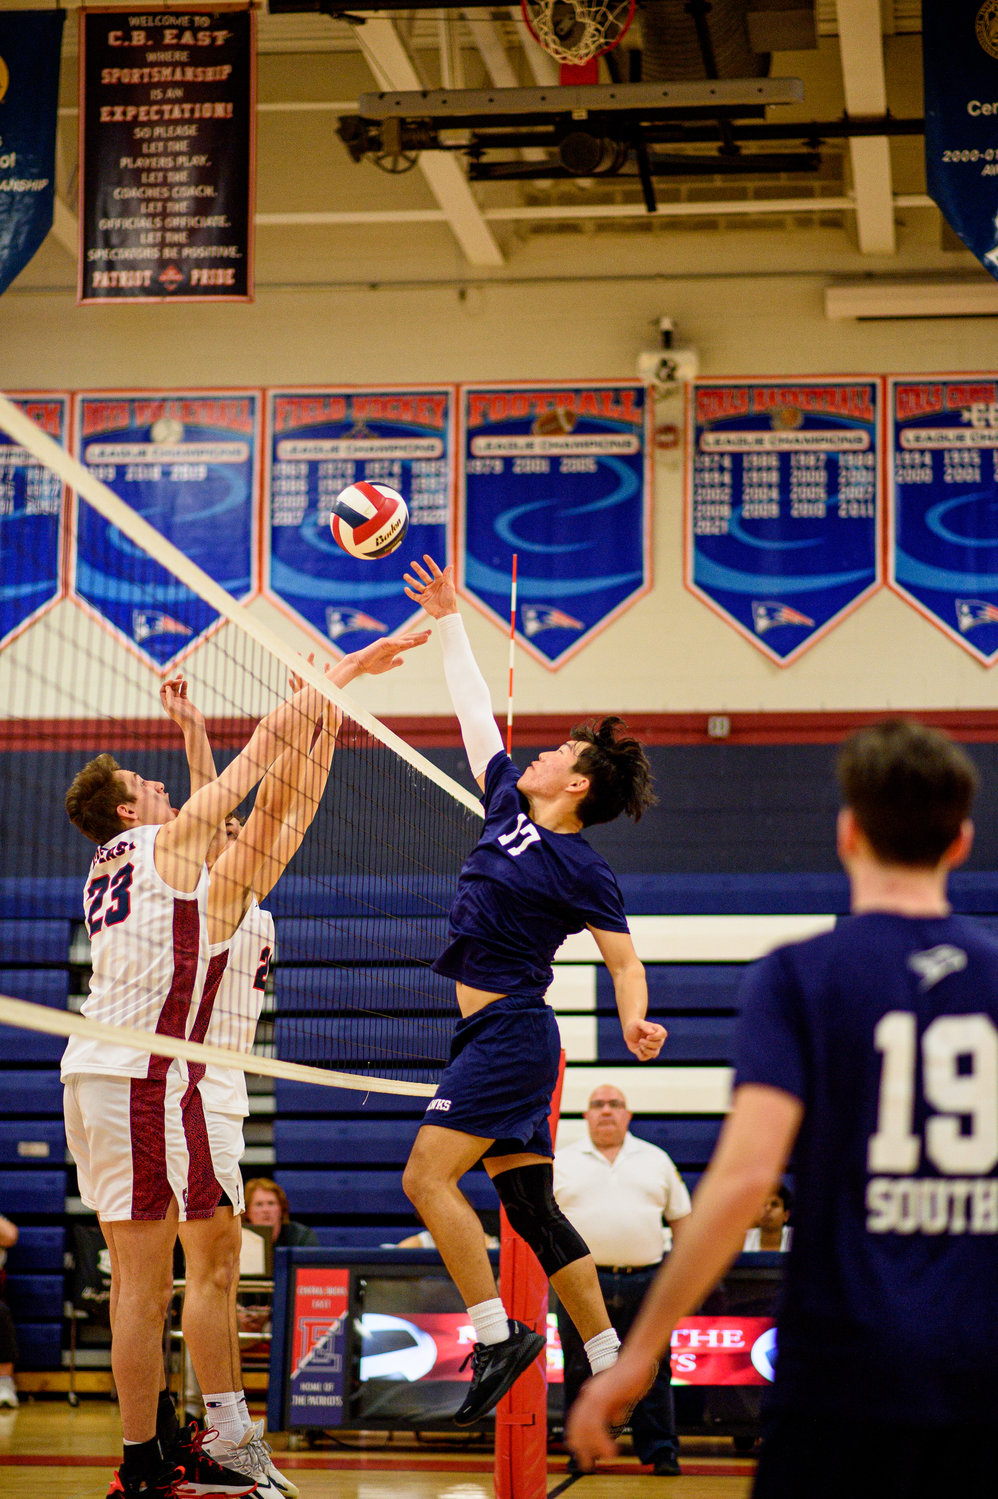 CR South’s Adil Abakirov reaches over the net.